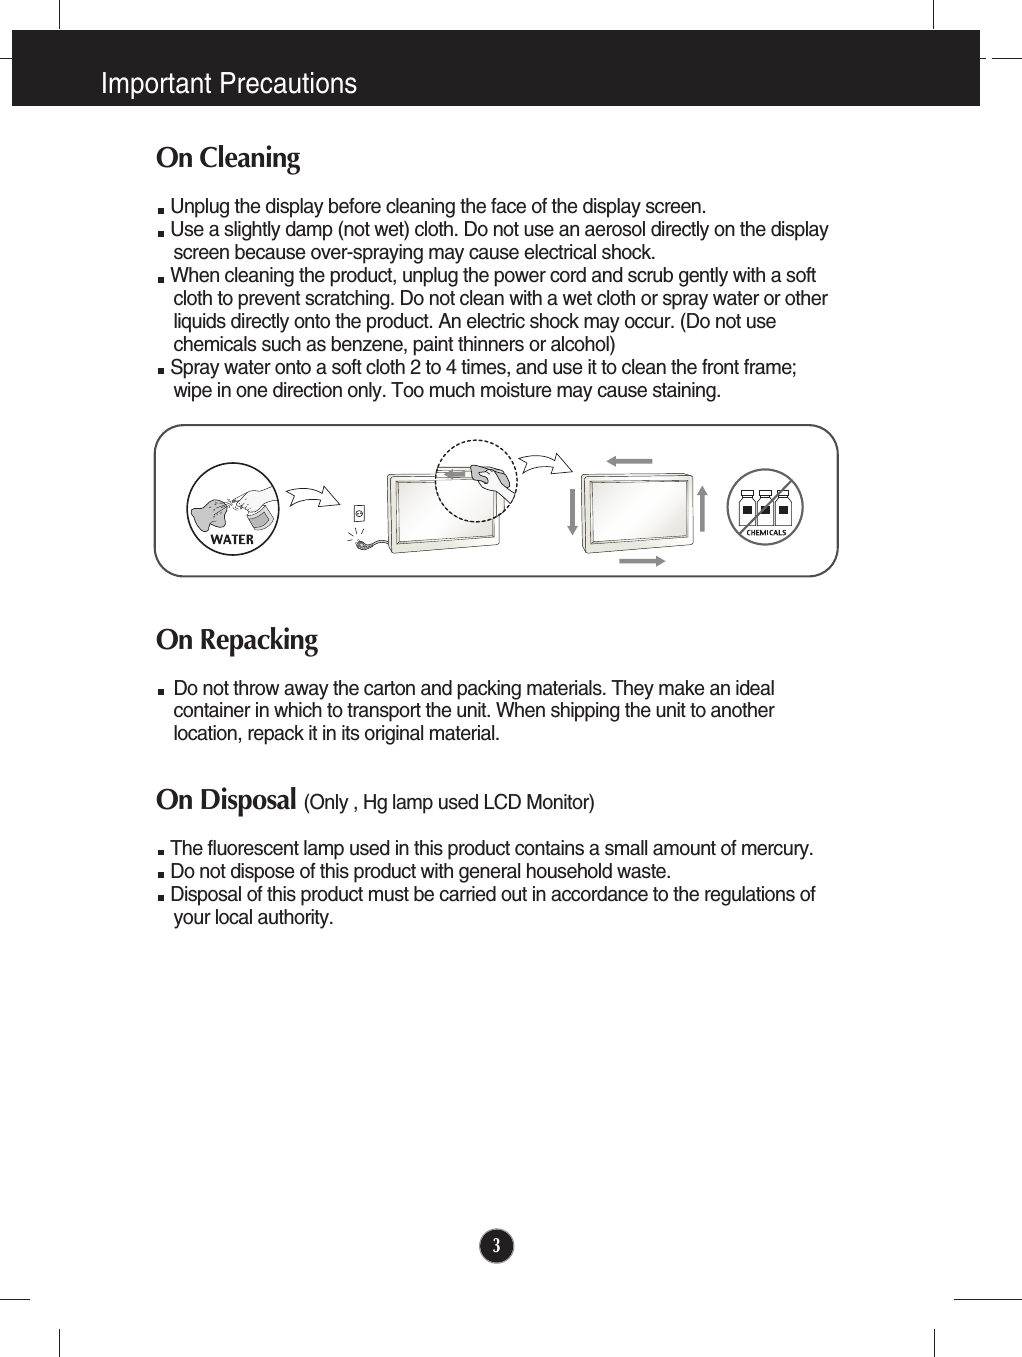 Important Precautions3On CleaningUnplug the display before cleaning the face of the display screen.Use a slightly damp (not wet) cloth. Do not use an aerosol directly on the displayscreen because over-spraying may cause electrical shock.When cleaning the product, unplug the power cord and scrub gently with a softcloth to prevent scratching. Do not clean with a wet cloth or spray water or otherliquids directly onto the product. An electric shock may occur. (Do not usechemicals such as benzene, paint thinners or alcohol) Spray water onto a soft cloth 2 to 4 times, and use it to clean the front frame;wipe in one direction only. Too much moisture may cause staining.  On RepackingDo not throw away the carton and packing materials. They make an idealcontainer in which to transport the unit. When shipping the unit to anotherlocation, repack it in its original material.On Disposal (Only , Hg lamp used LCD Monitor)The fluorescent lamp used in this product contains a small amount of mercury.Do not dispose of this product with general household waste.Disposal of this product must be carried out in accordance to the regulations ofyour local authority.